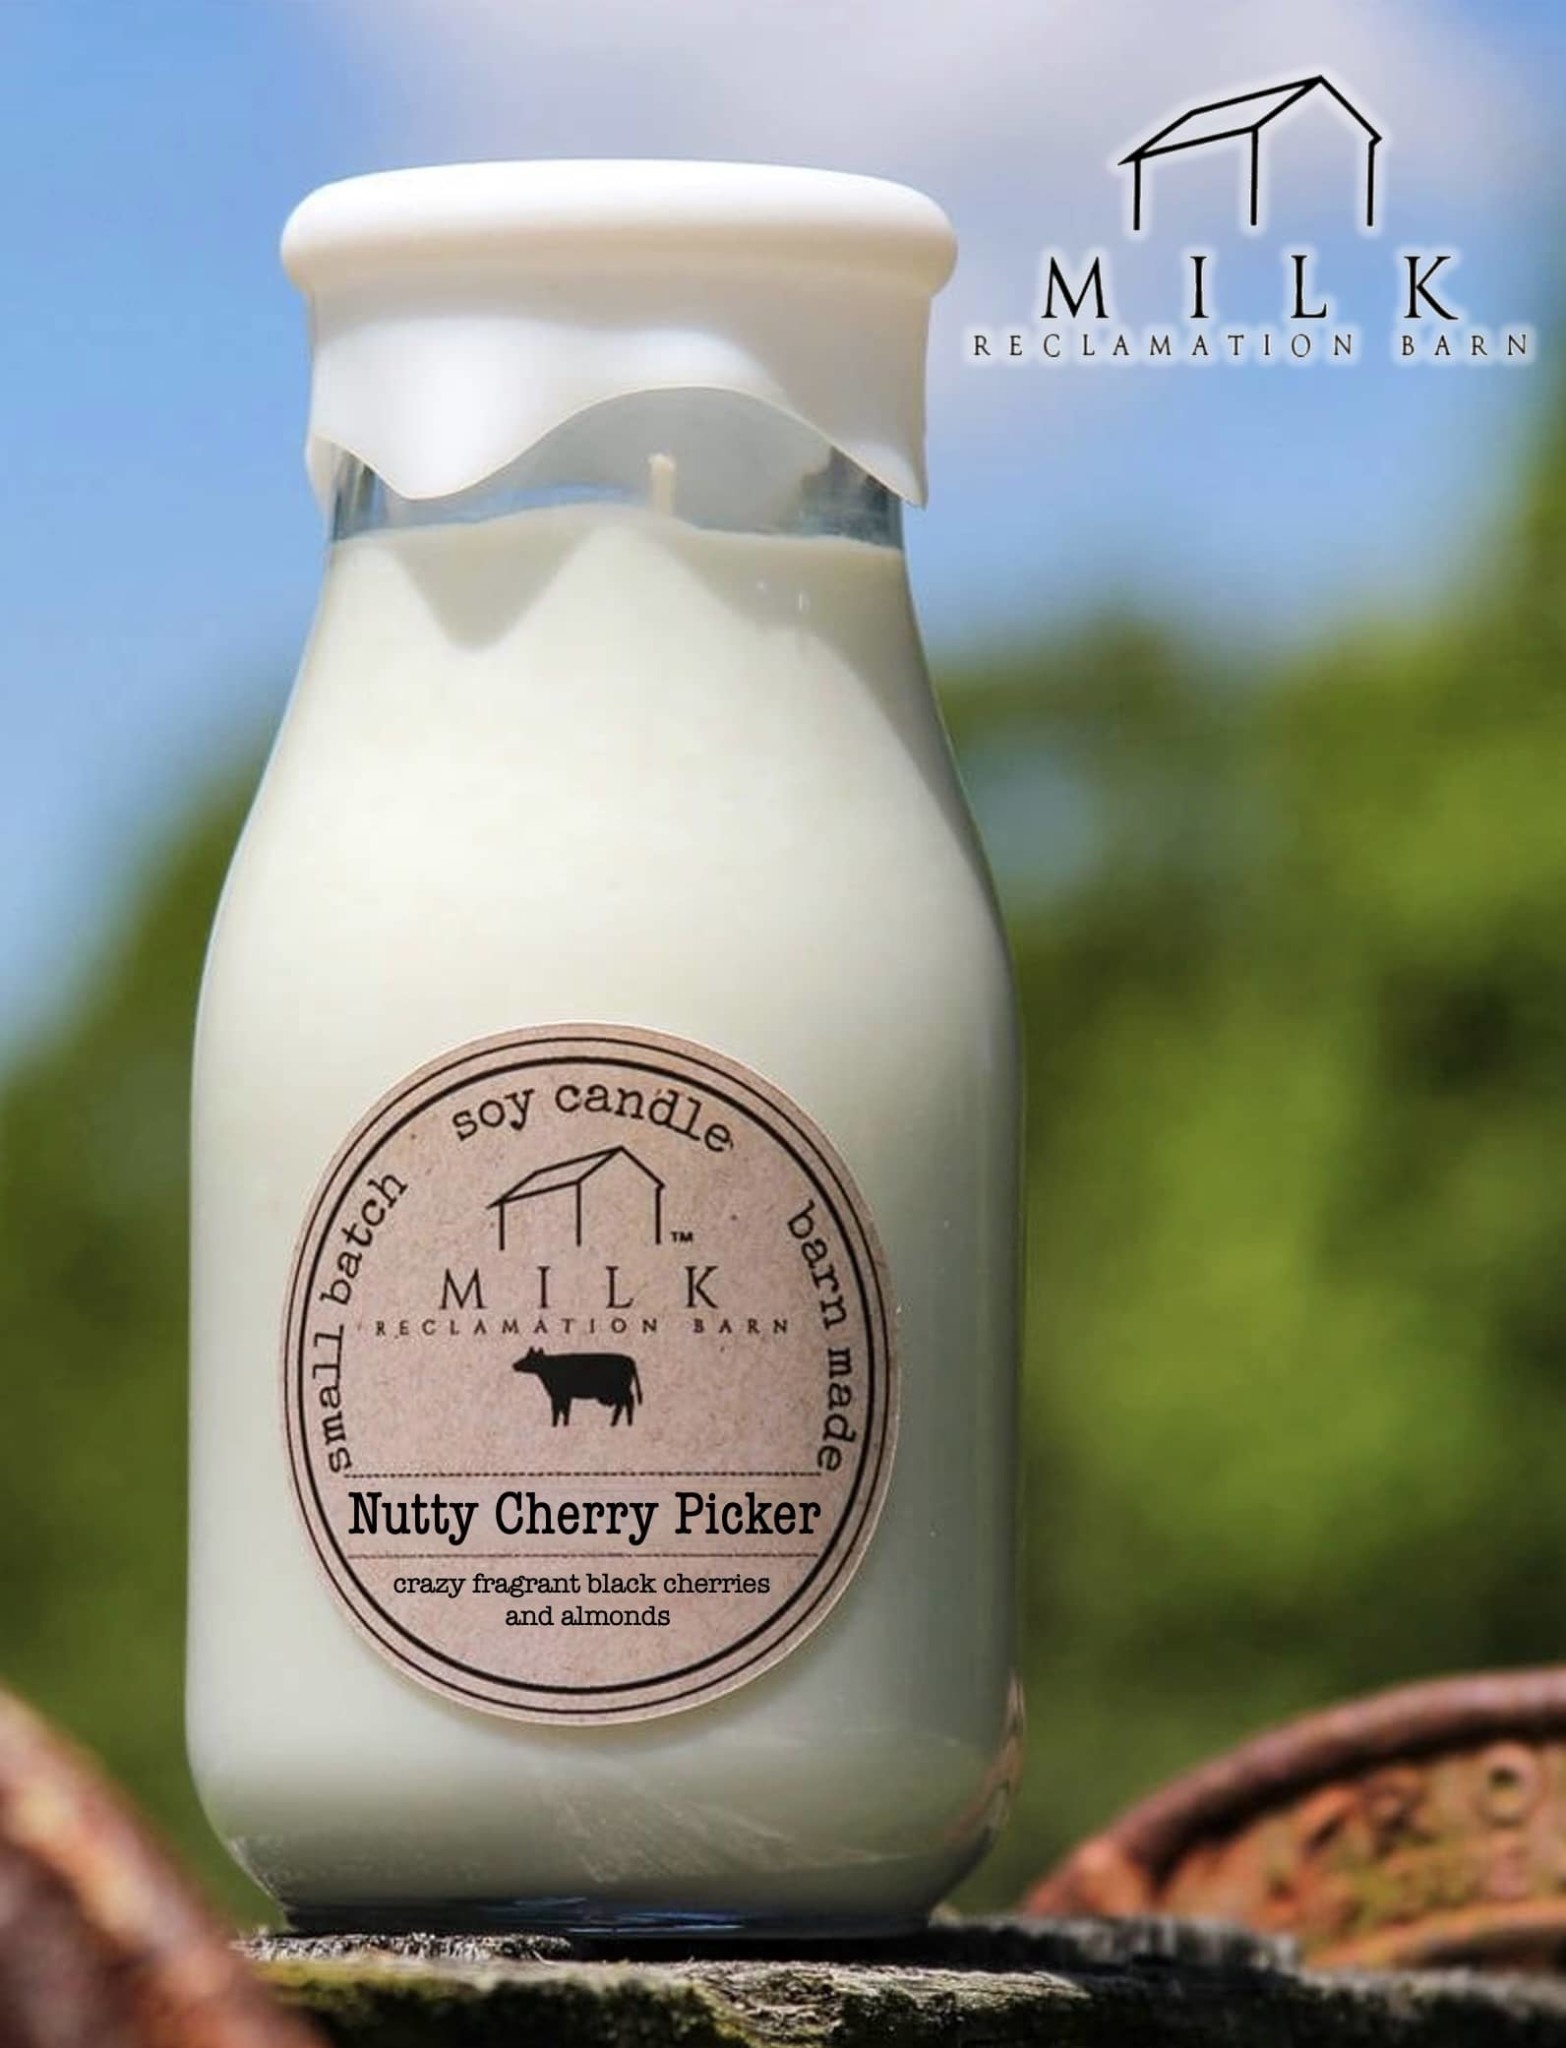 Milk Reclamation Barn Candles Nutty Cherry Picker Soy Milk Bottle Candle - 16oz Brand: Milk Reclamation Barn Candles